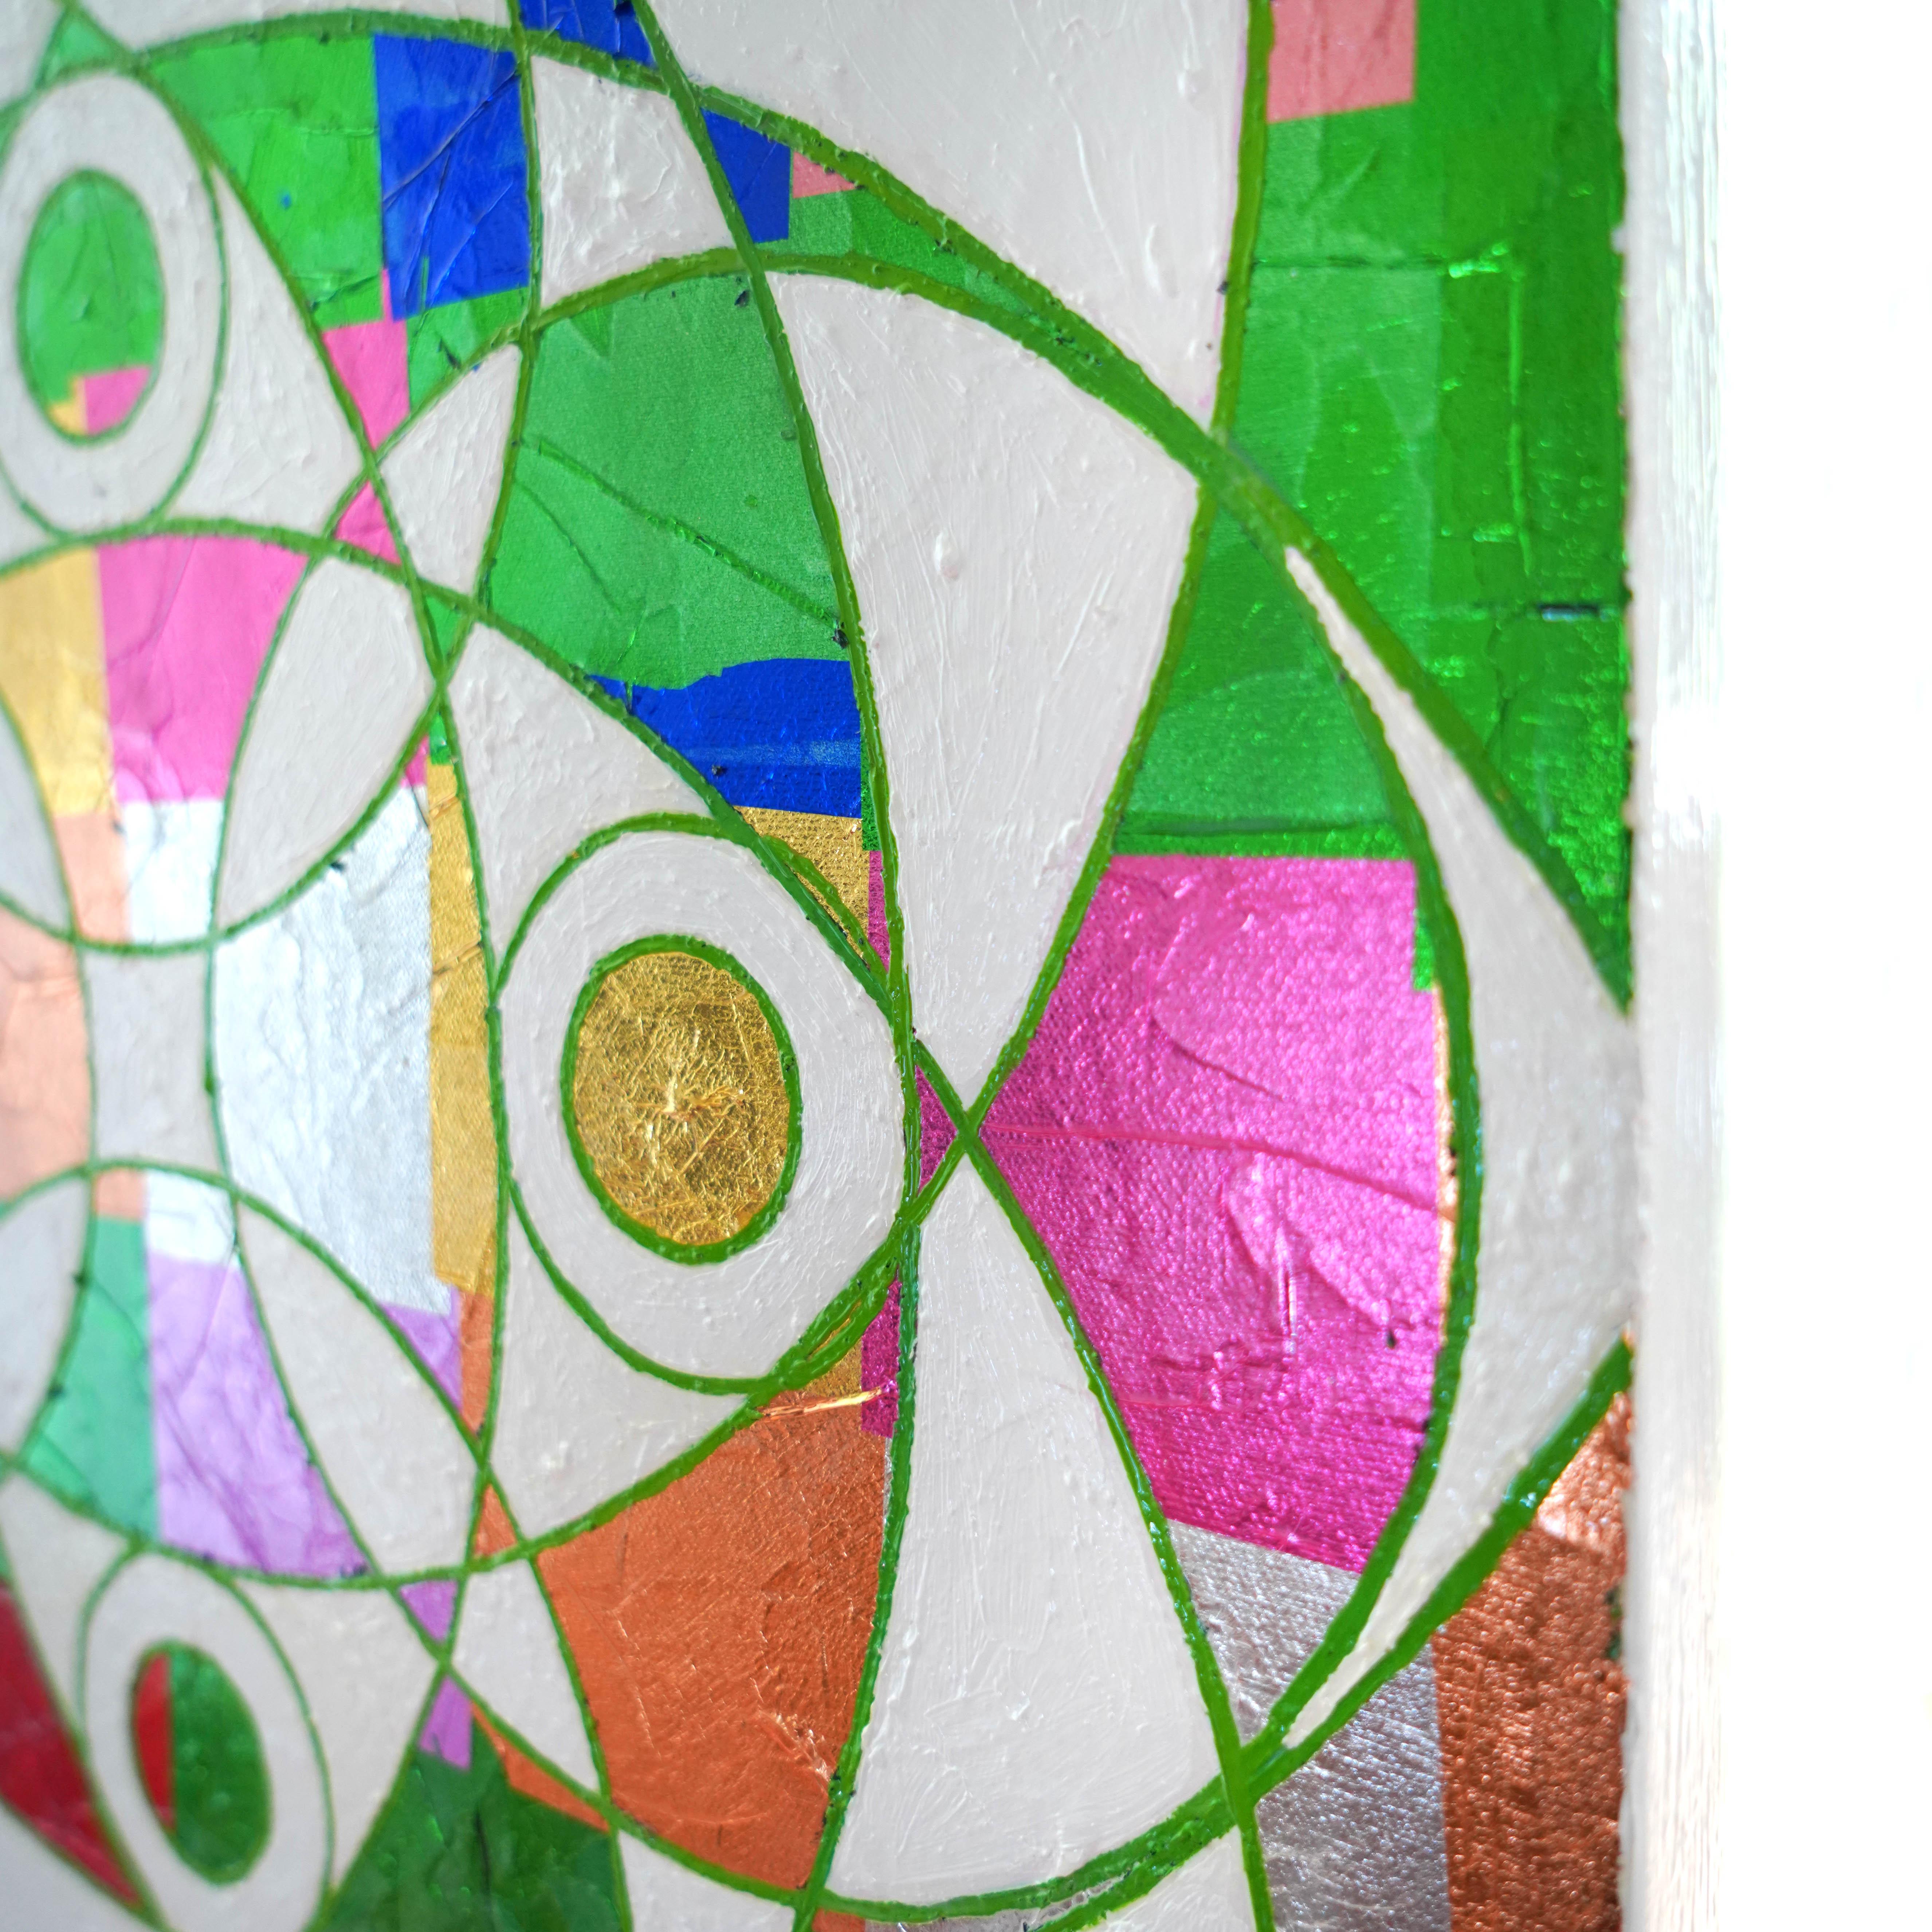 Oil and Metallic Leaf on Canvas

Mixing numerology, sacred geometry, and symbology with inspiration from contemporary art and interior design, Unity In Color explores the colorful world of the 7 chakras of the body to bring harmony to the mind,